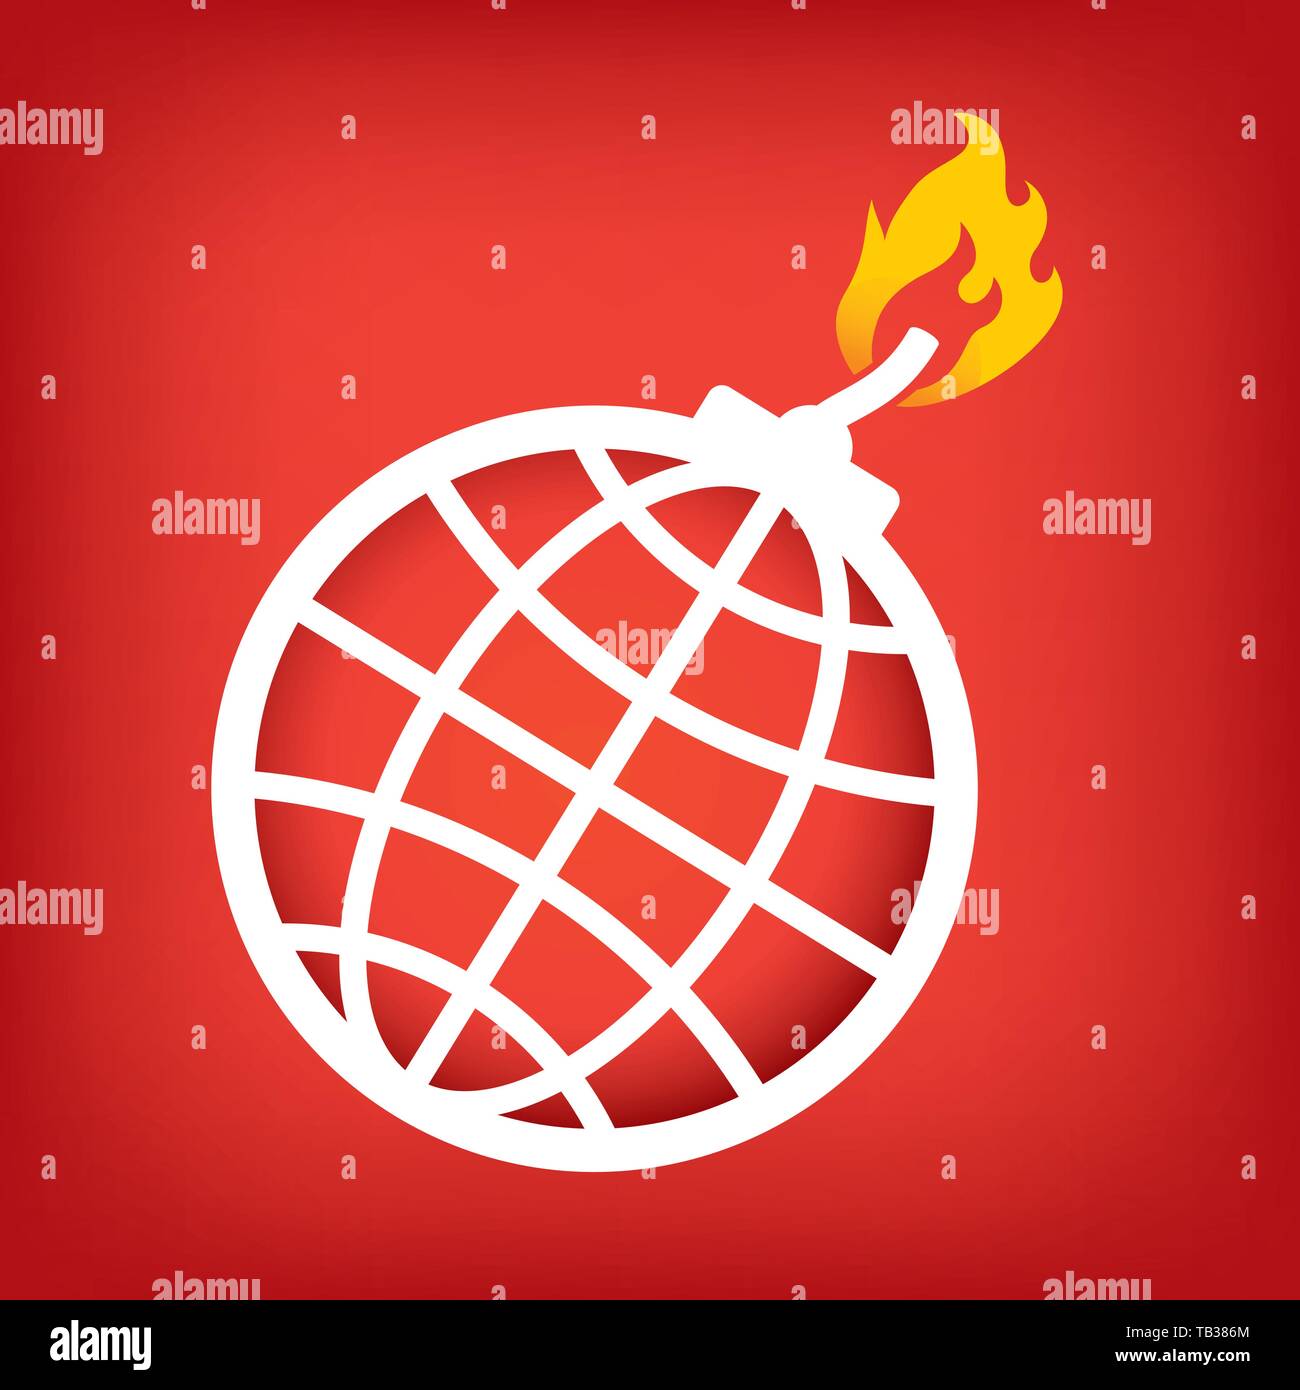 Vector illustration. Metaphor of climatic change or global warming. Earth challenge. Stock Vector